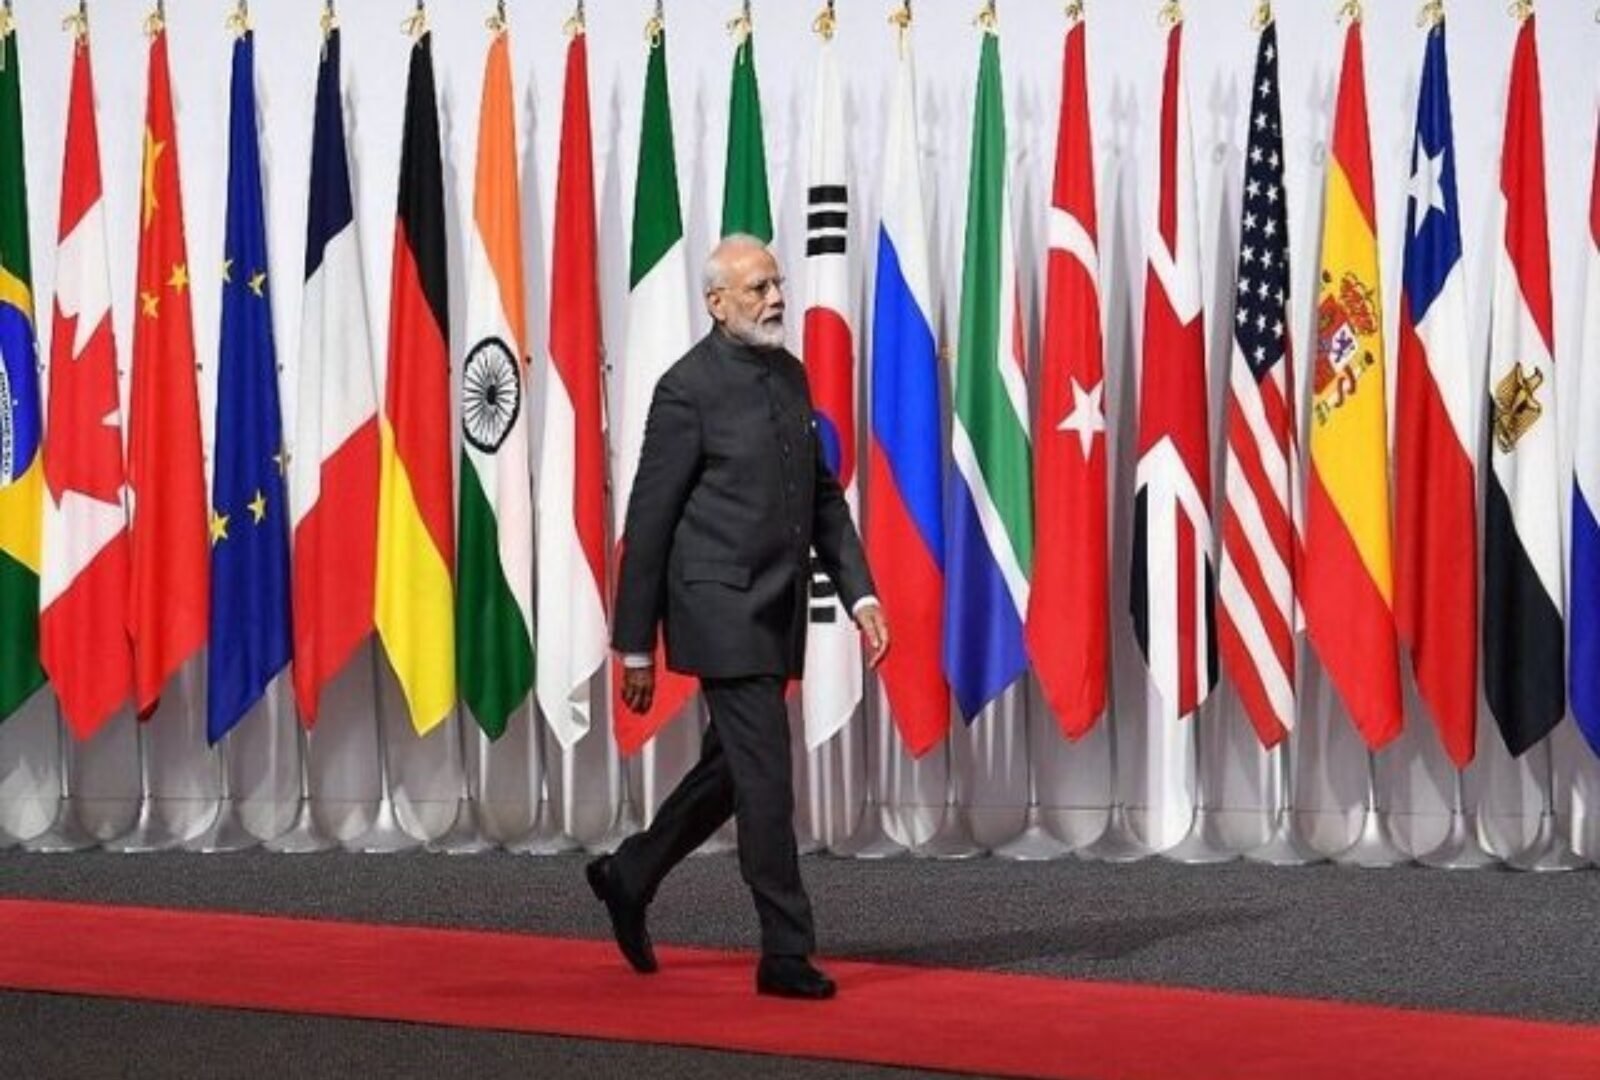 Read more about the article India’s Grand Showcase at the G20 Summit: Top 10 things that India showcased in G20 Summit